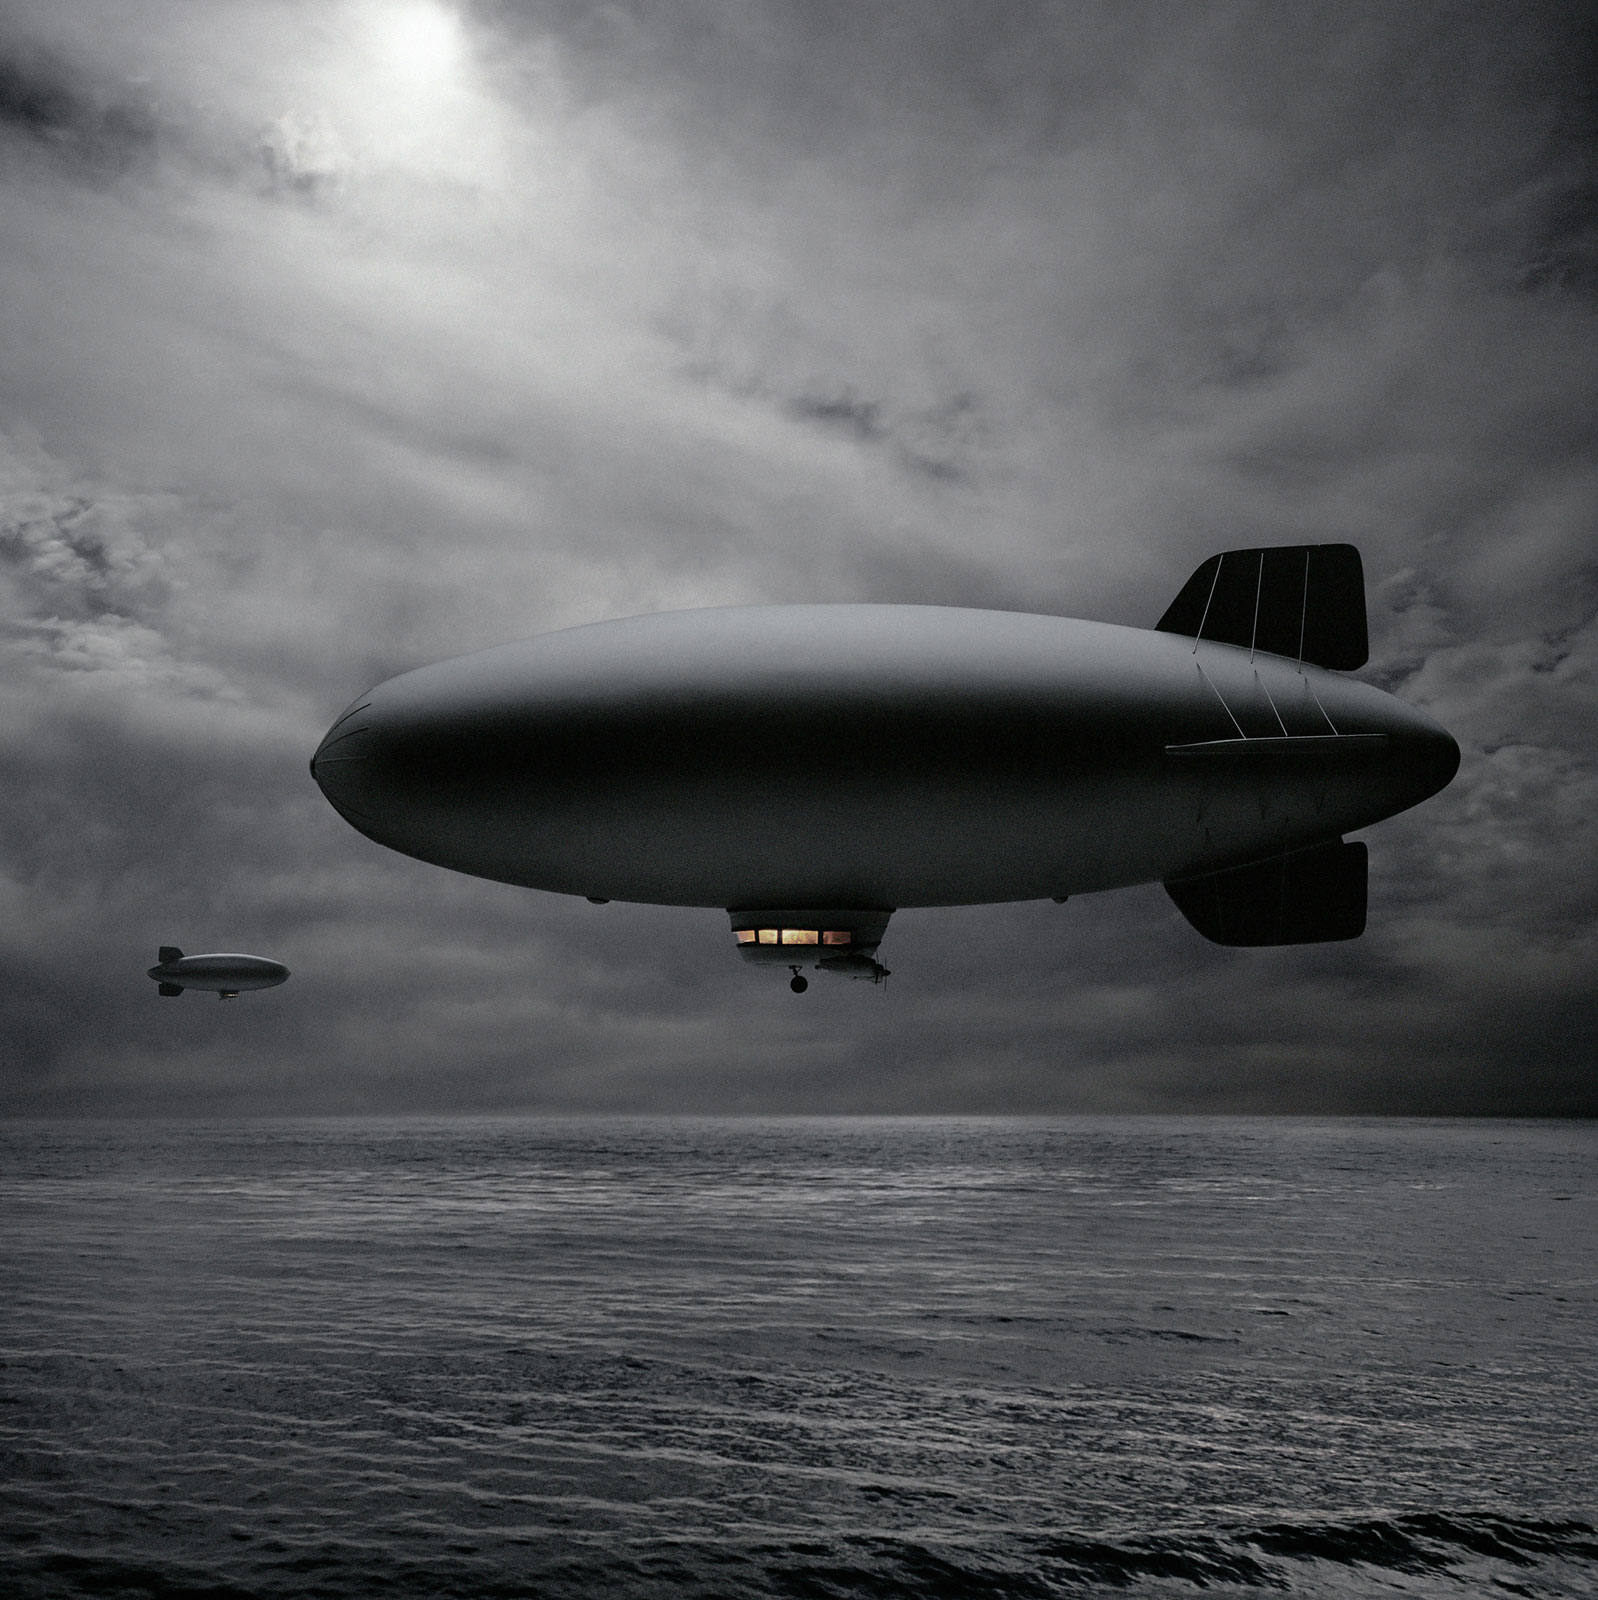 "Two Blimps Passing in the Night"